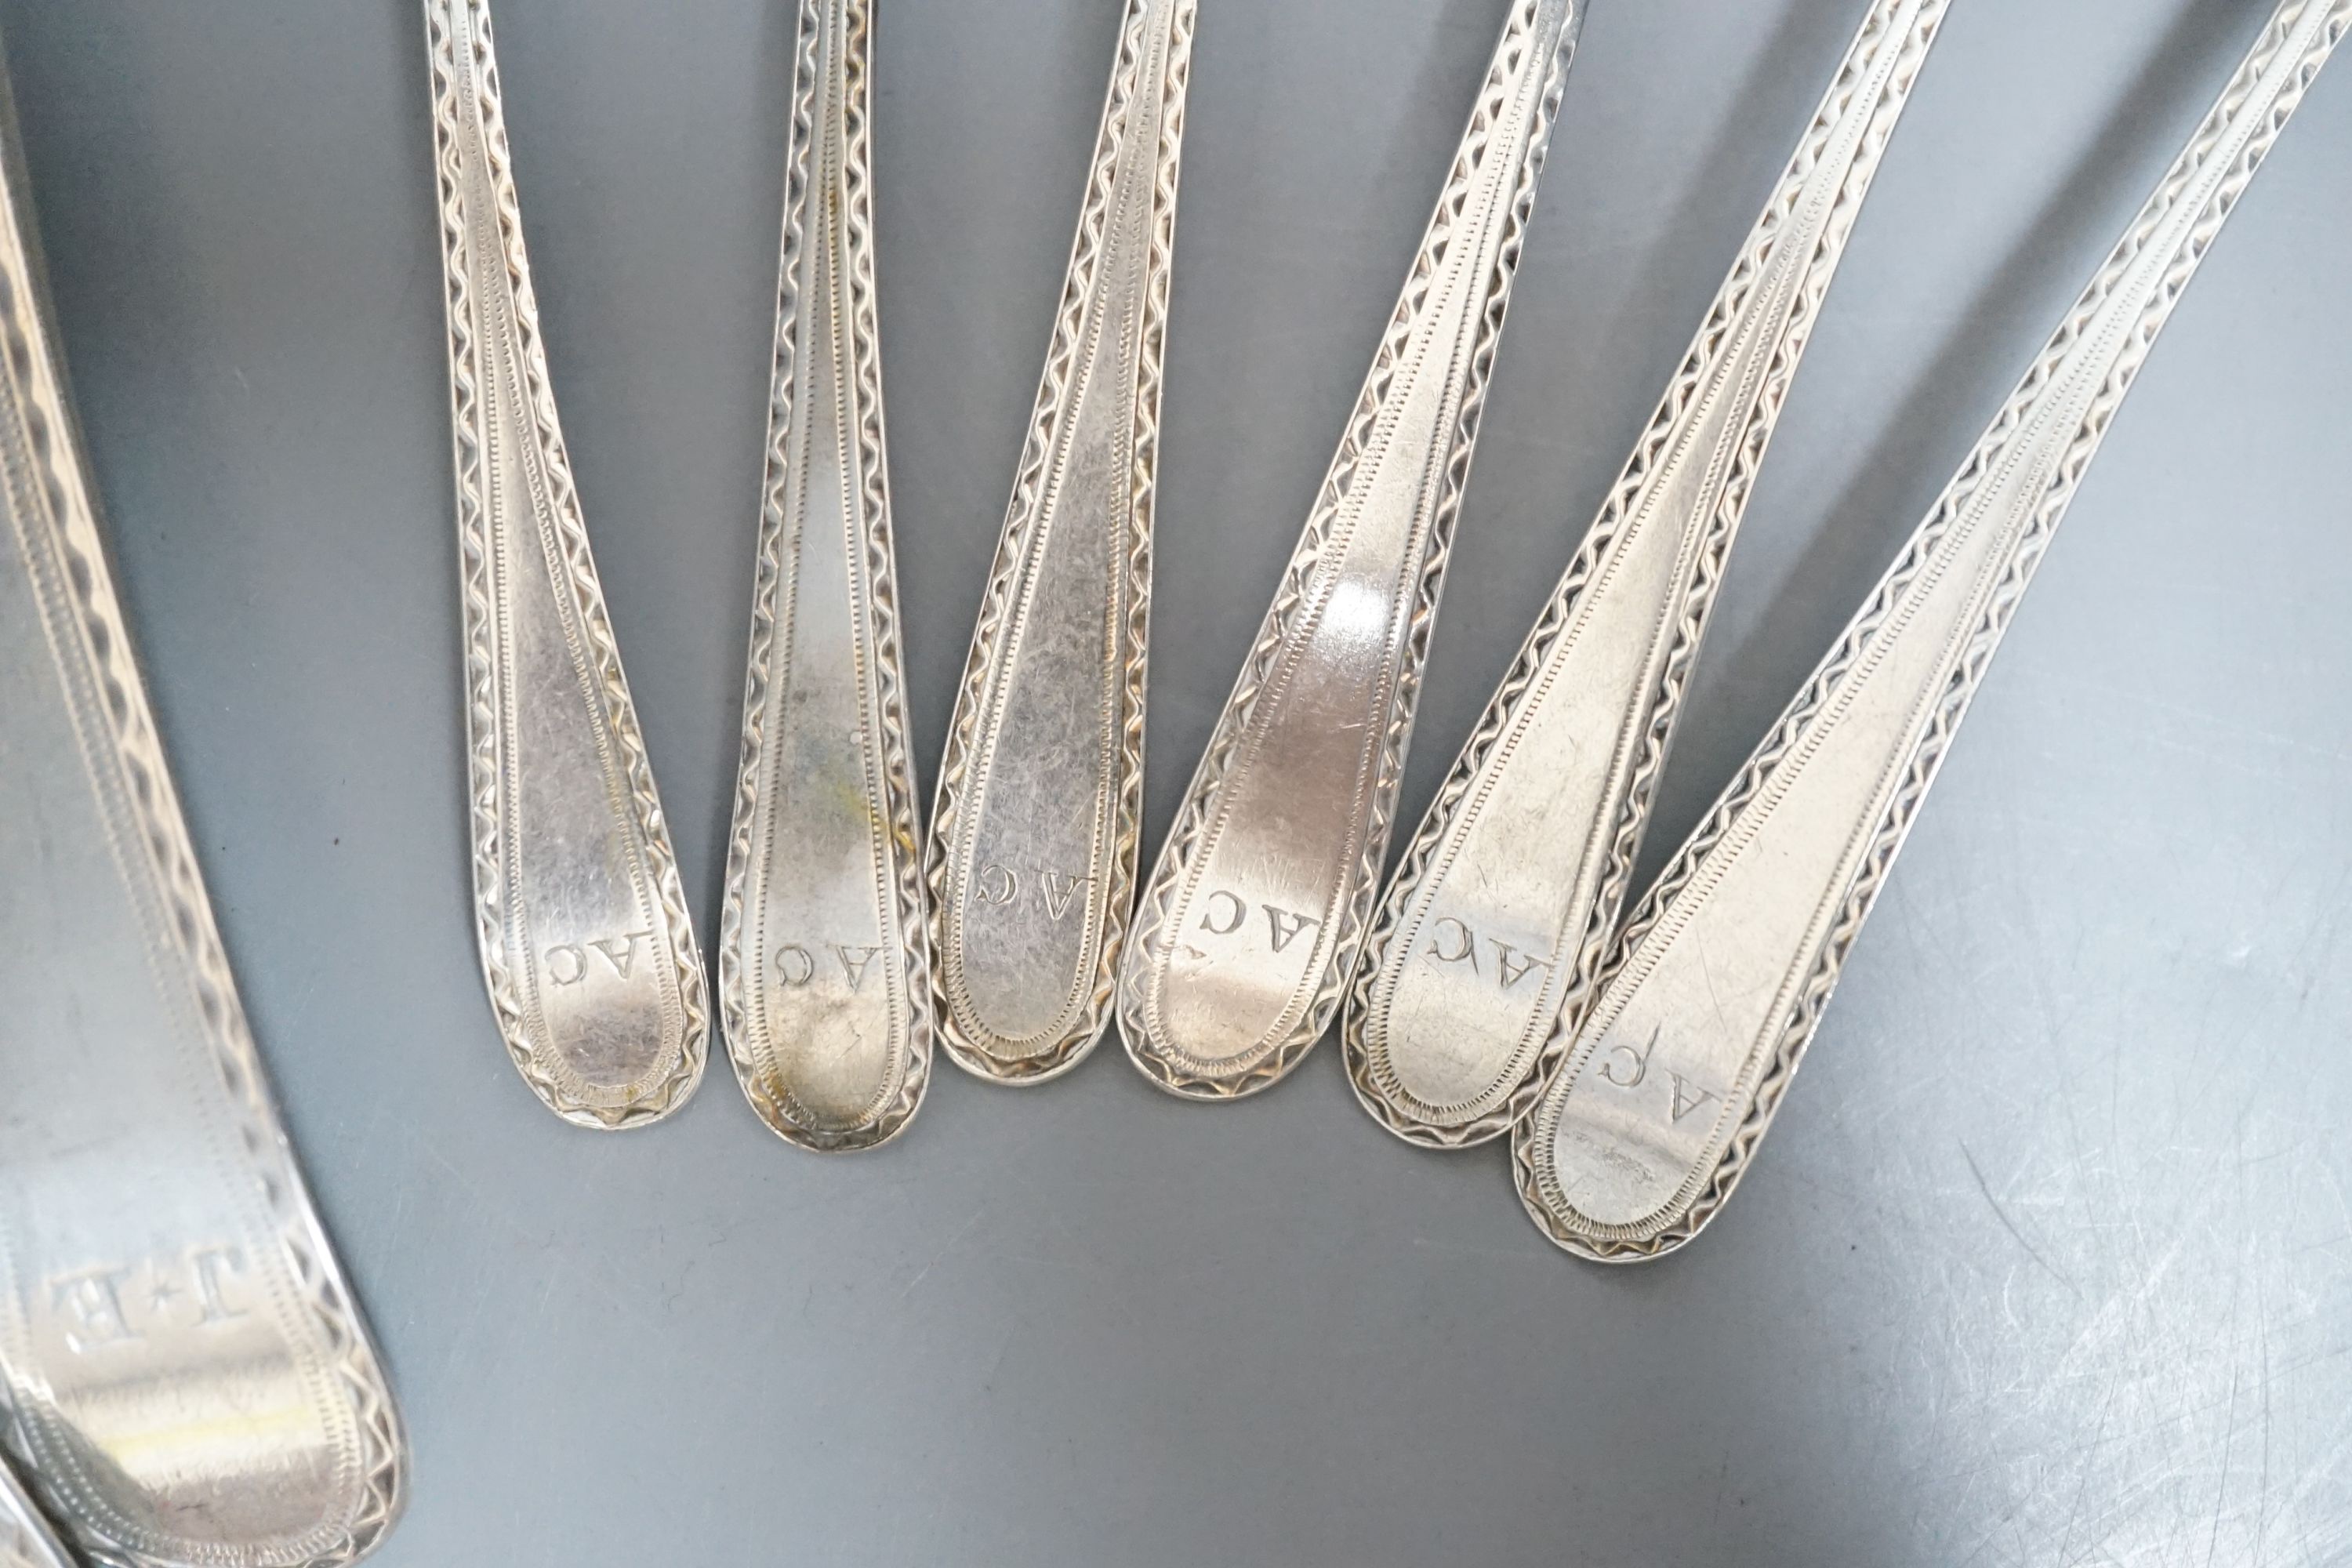 A set of silver George III bright cut engraved silver Old English pattern teaspoons, by Hester - Image 2 of 6